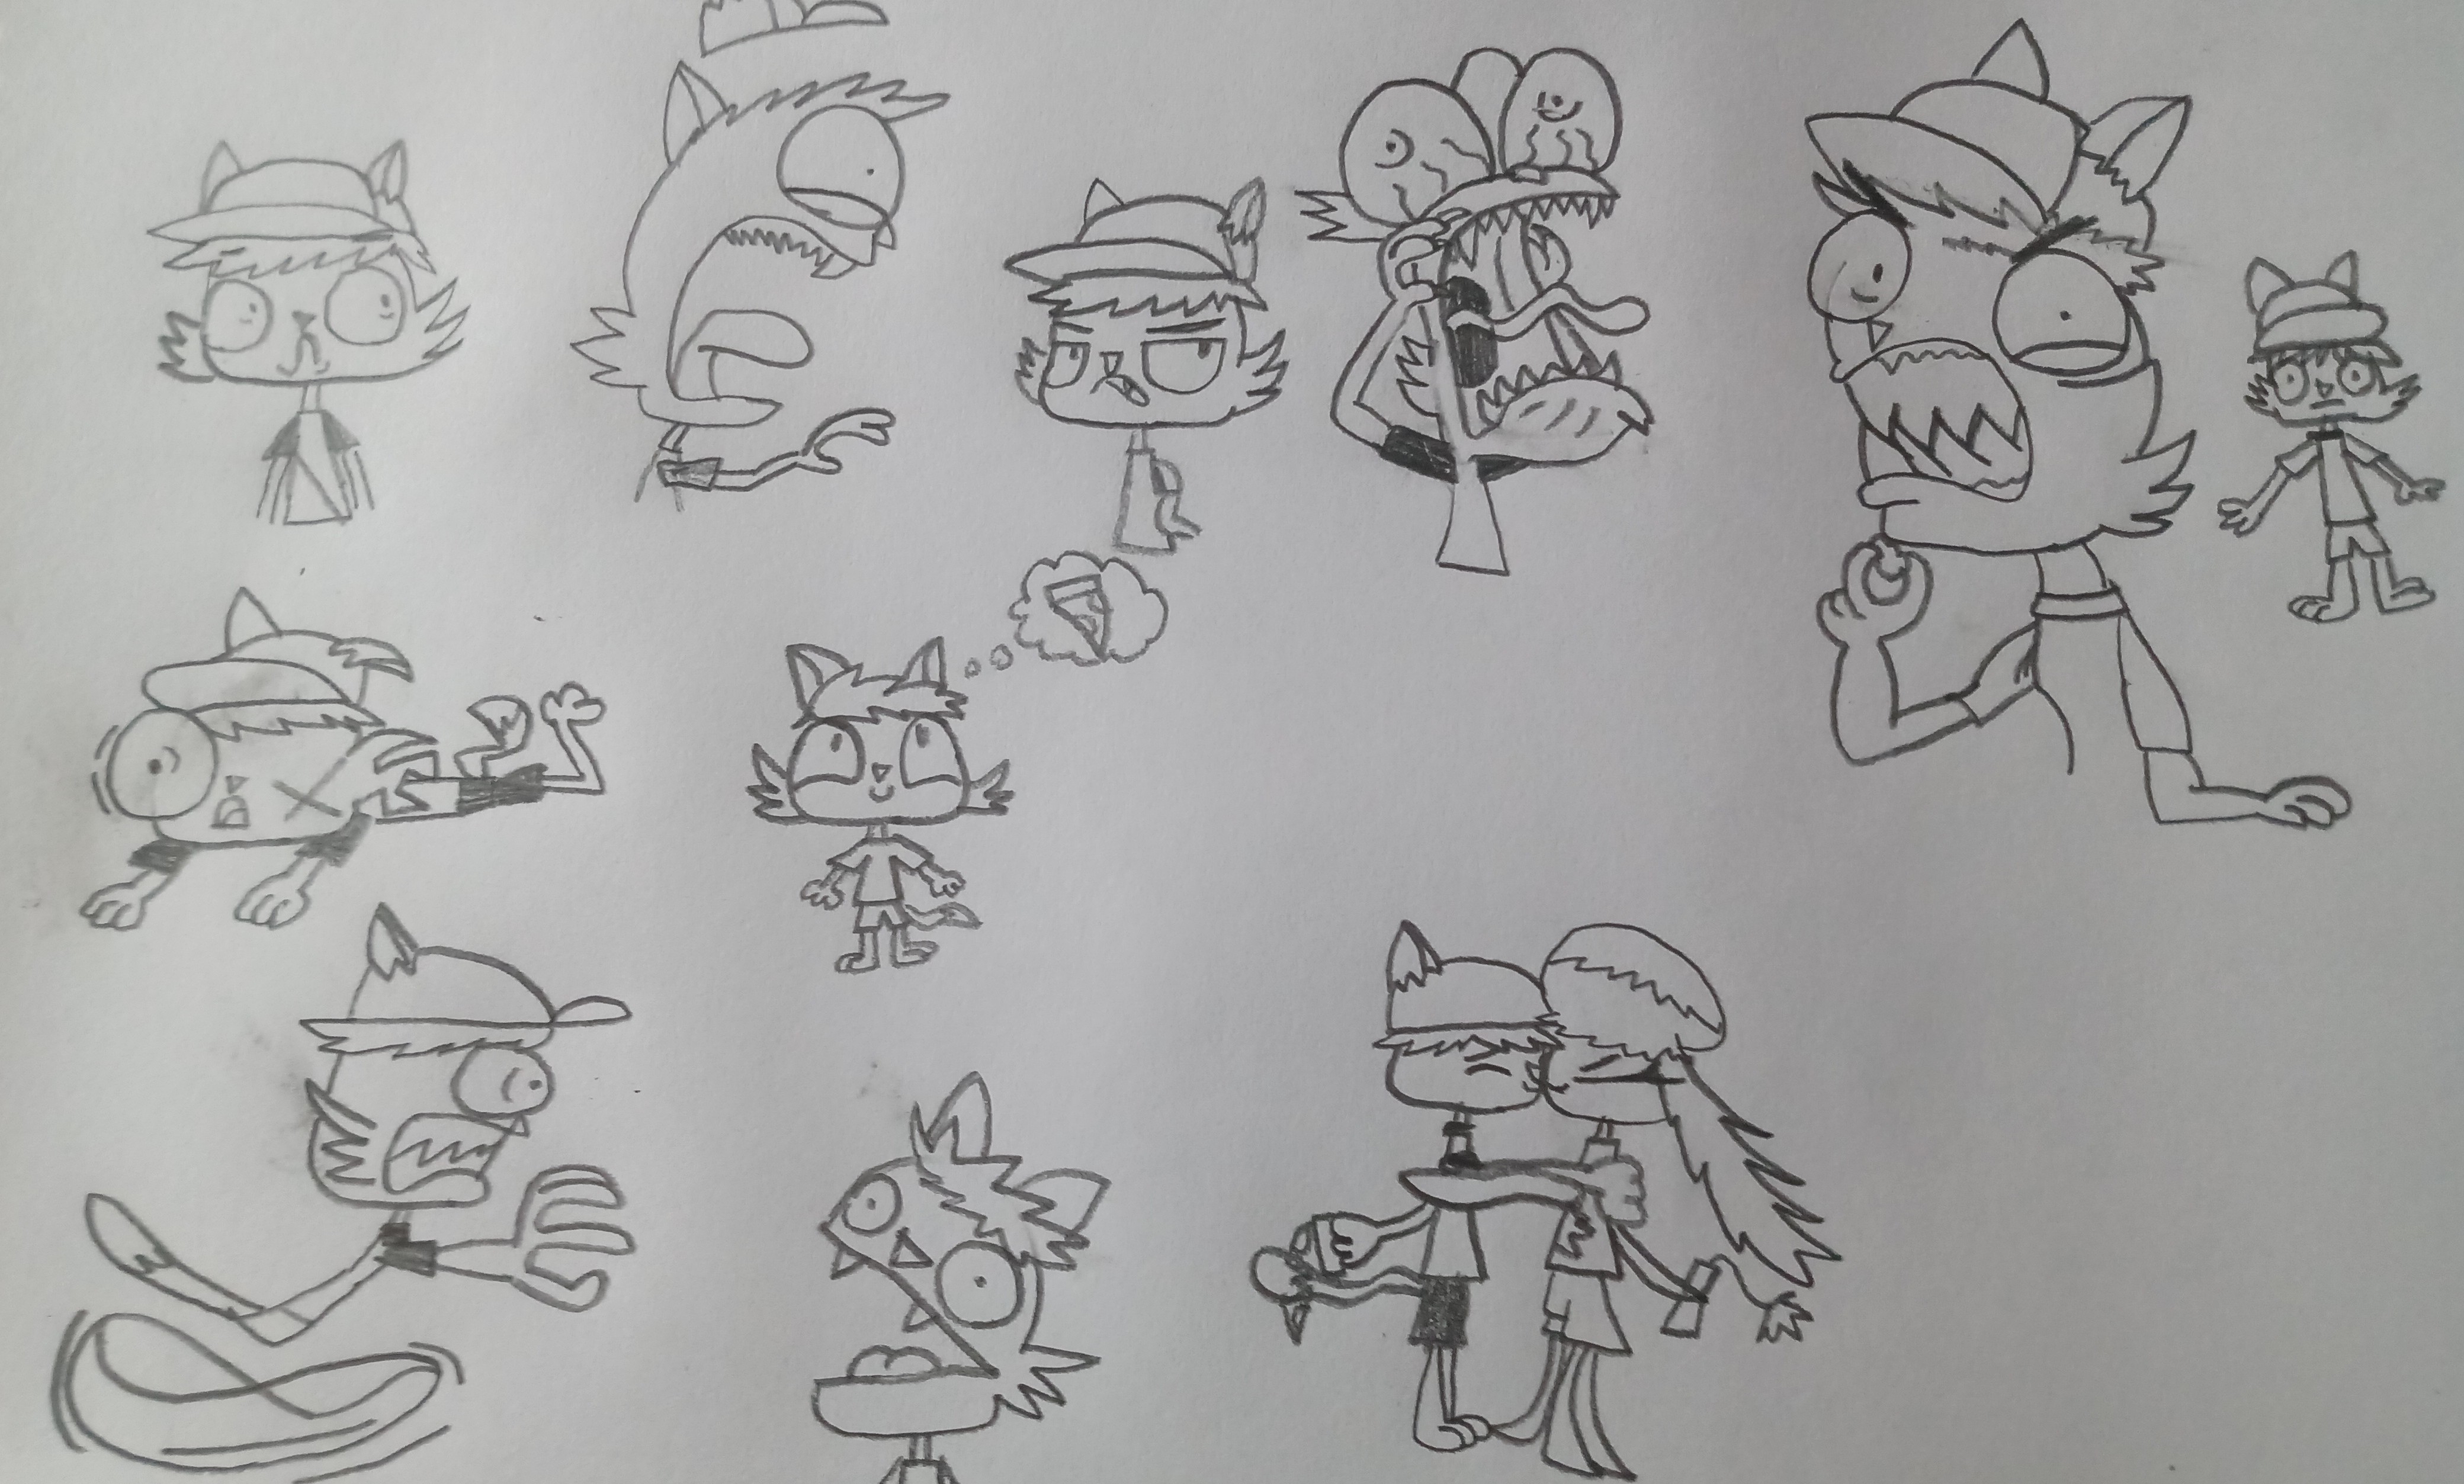 Pizza Tower doodle logs 1-4 by STS-Puelle on Newgrounds